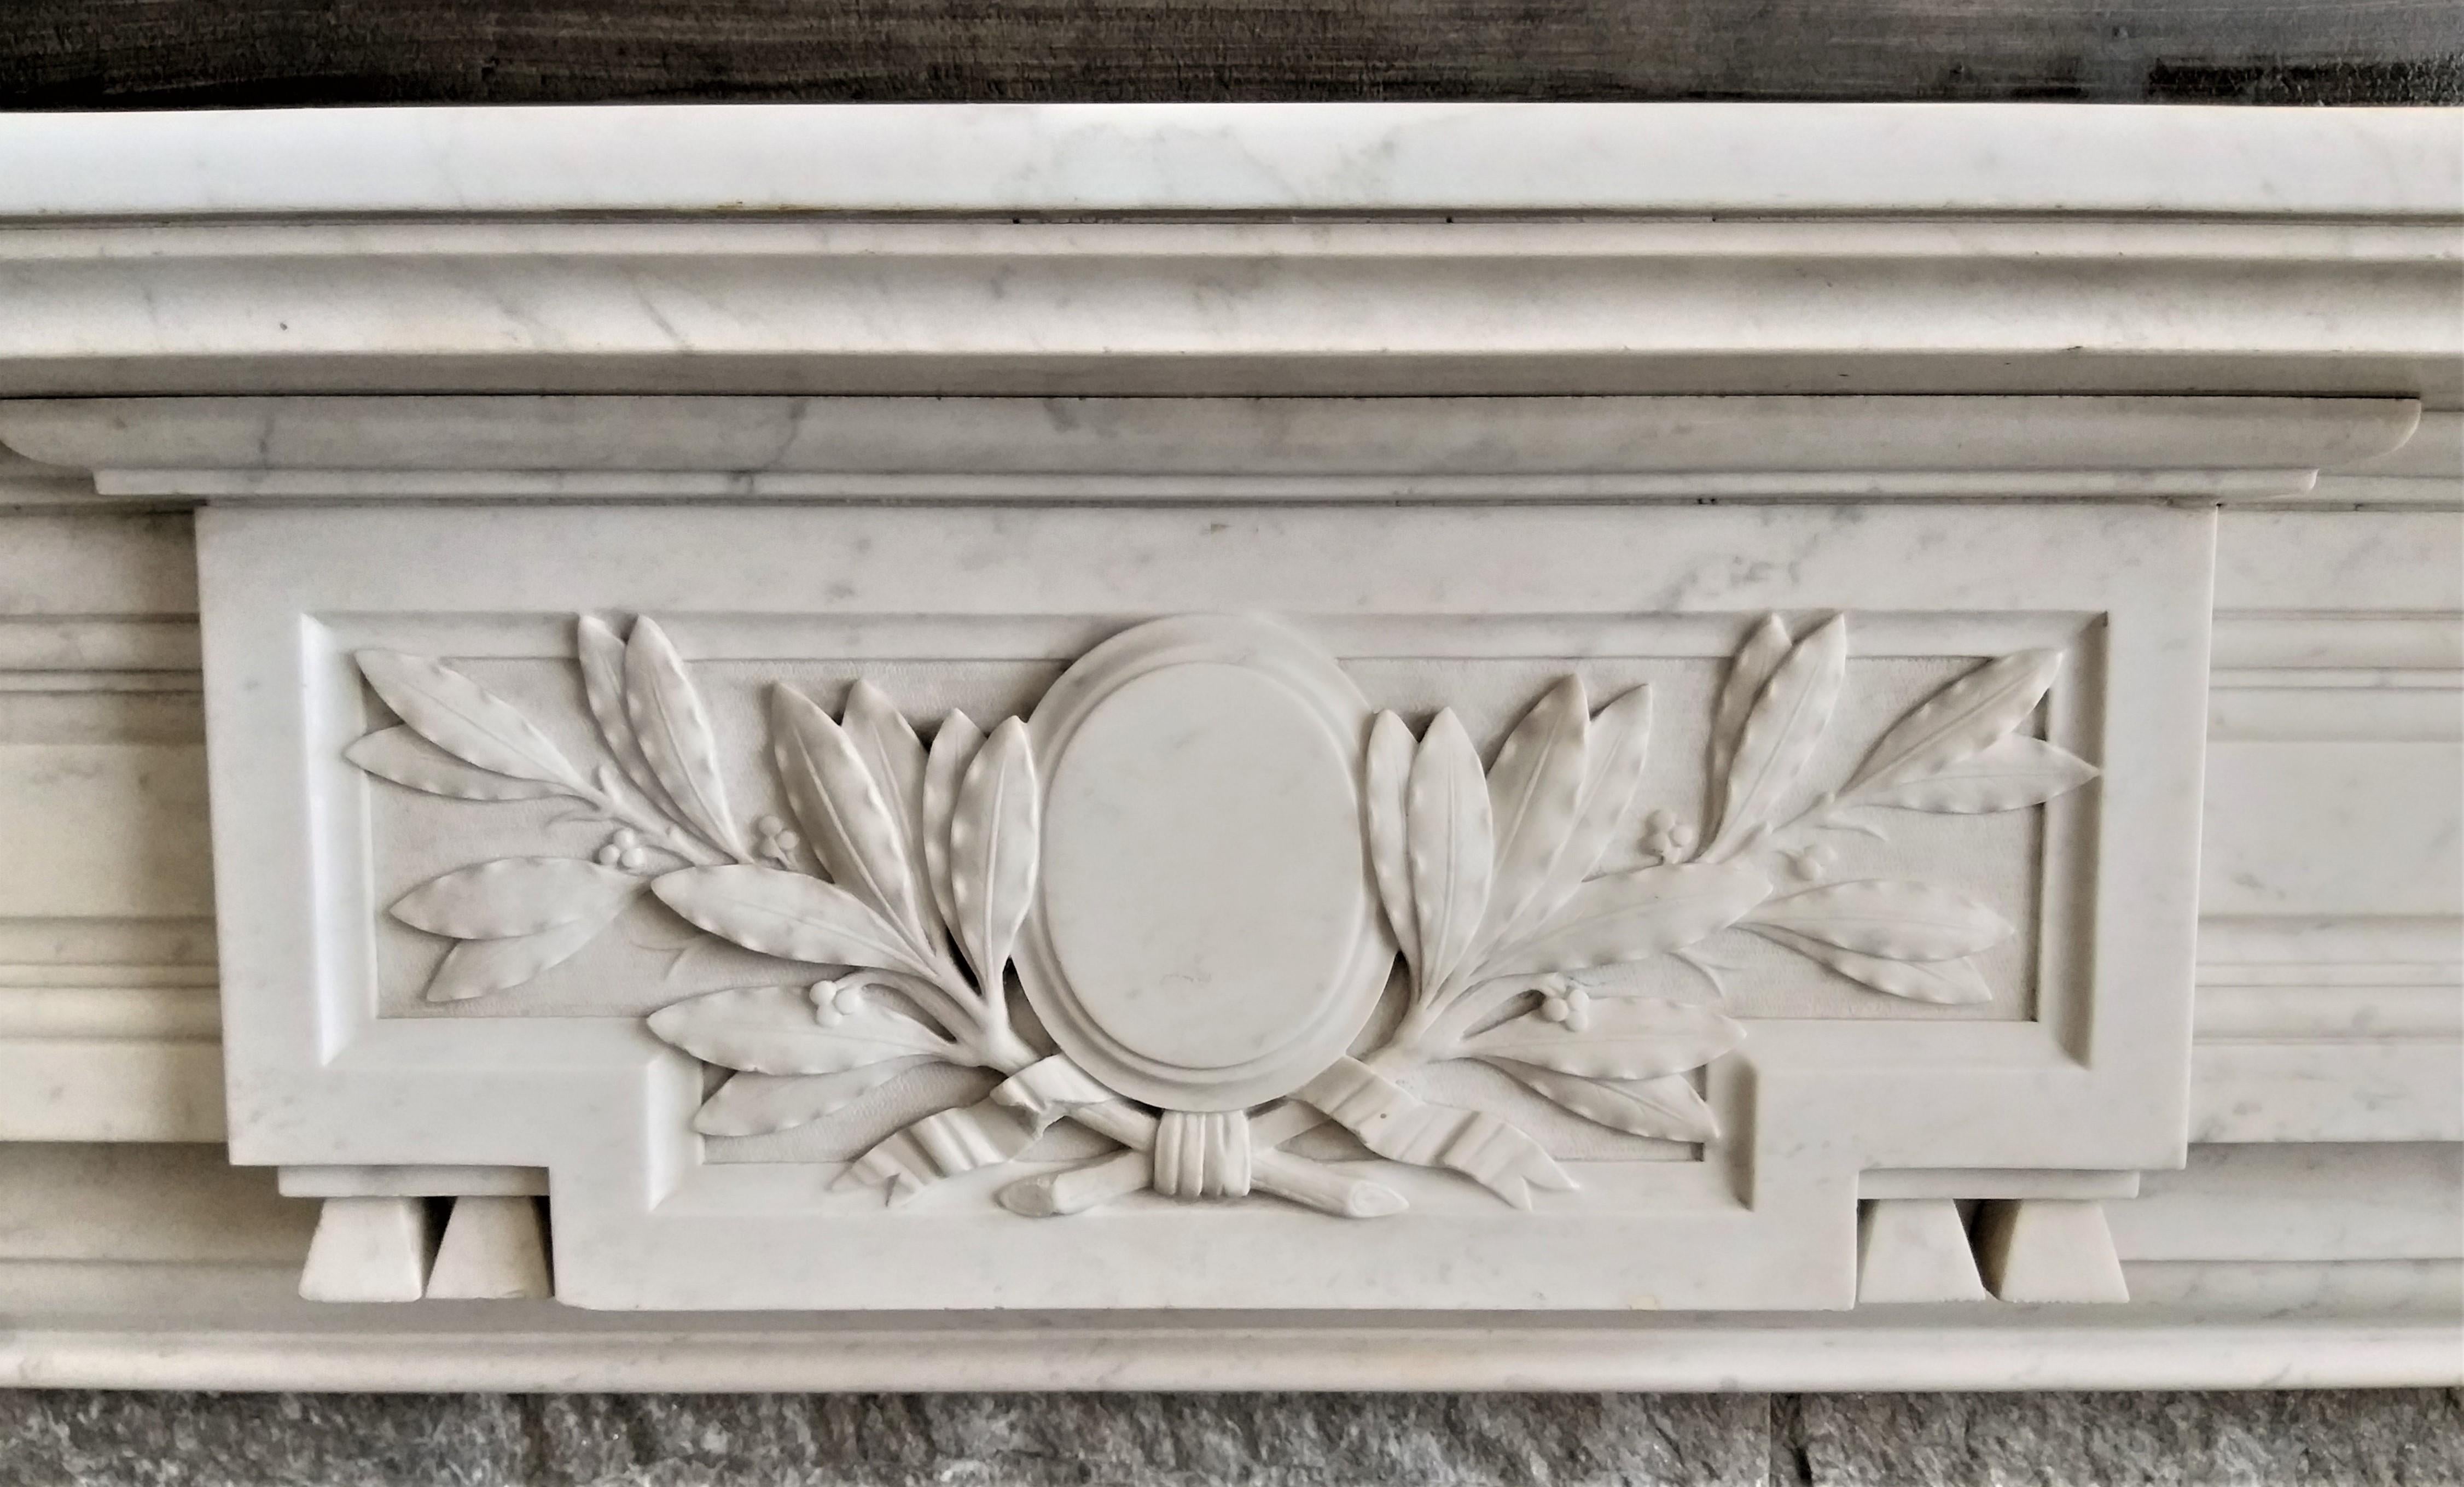 Strongly build fireplace, made out of Carrara marble. The tablet is with rounded corners and extra profiled fronts. The frieze and top-corners are nicely sculptured. It jambs are decorated with flutes and small asparagus-heads. This antique